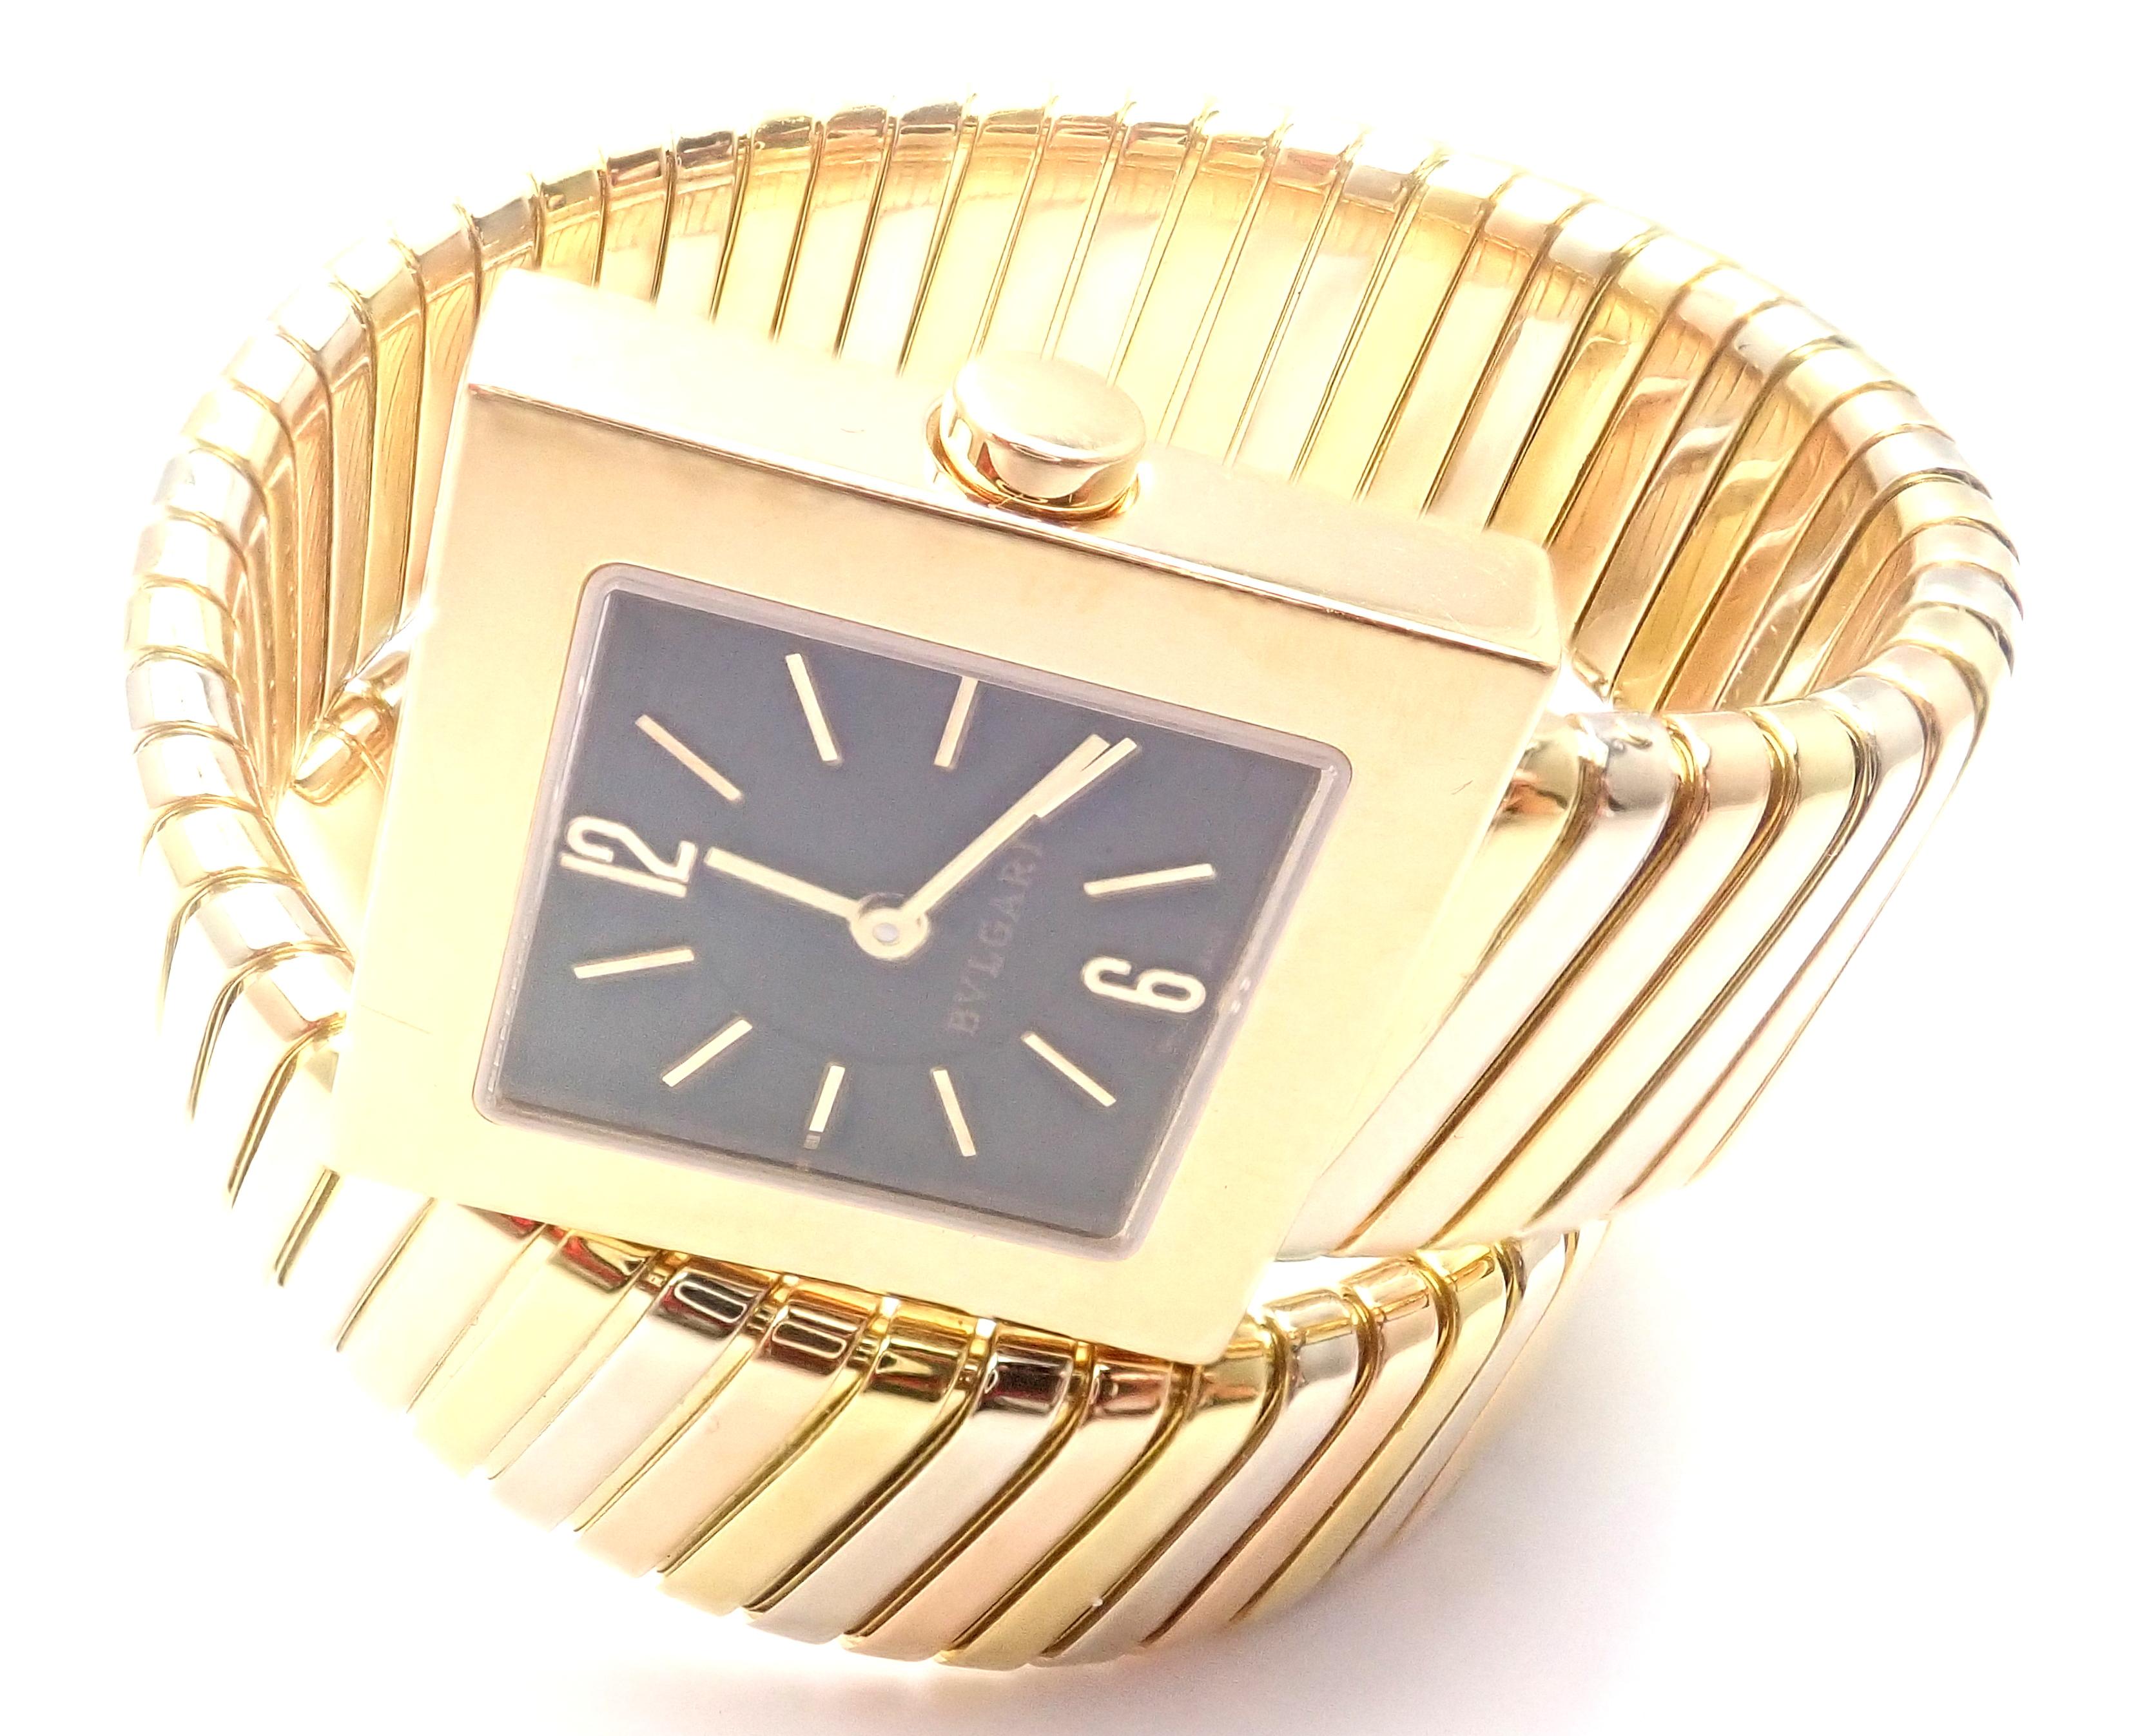 Bulgari lady's 18k tri-color gold (yellow, white, rose) Tubogas serpent bracelet watch. 
This watch comes with Bulgari certificate of authenticity and a box.
Details:
Model: SQ 22 1T
Movement Type: Quartz
Case Size: 20mm x 20mm
Crystal: Anti-glare